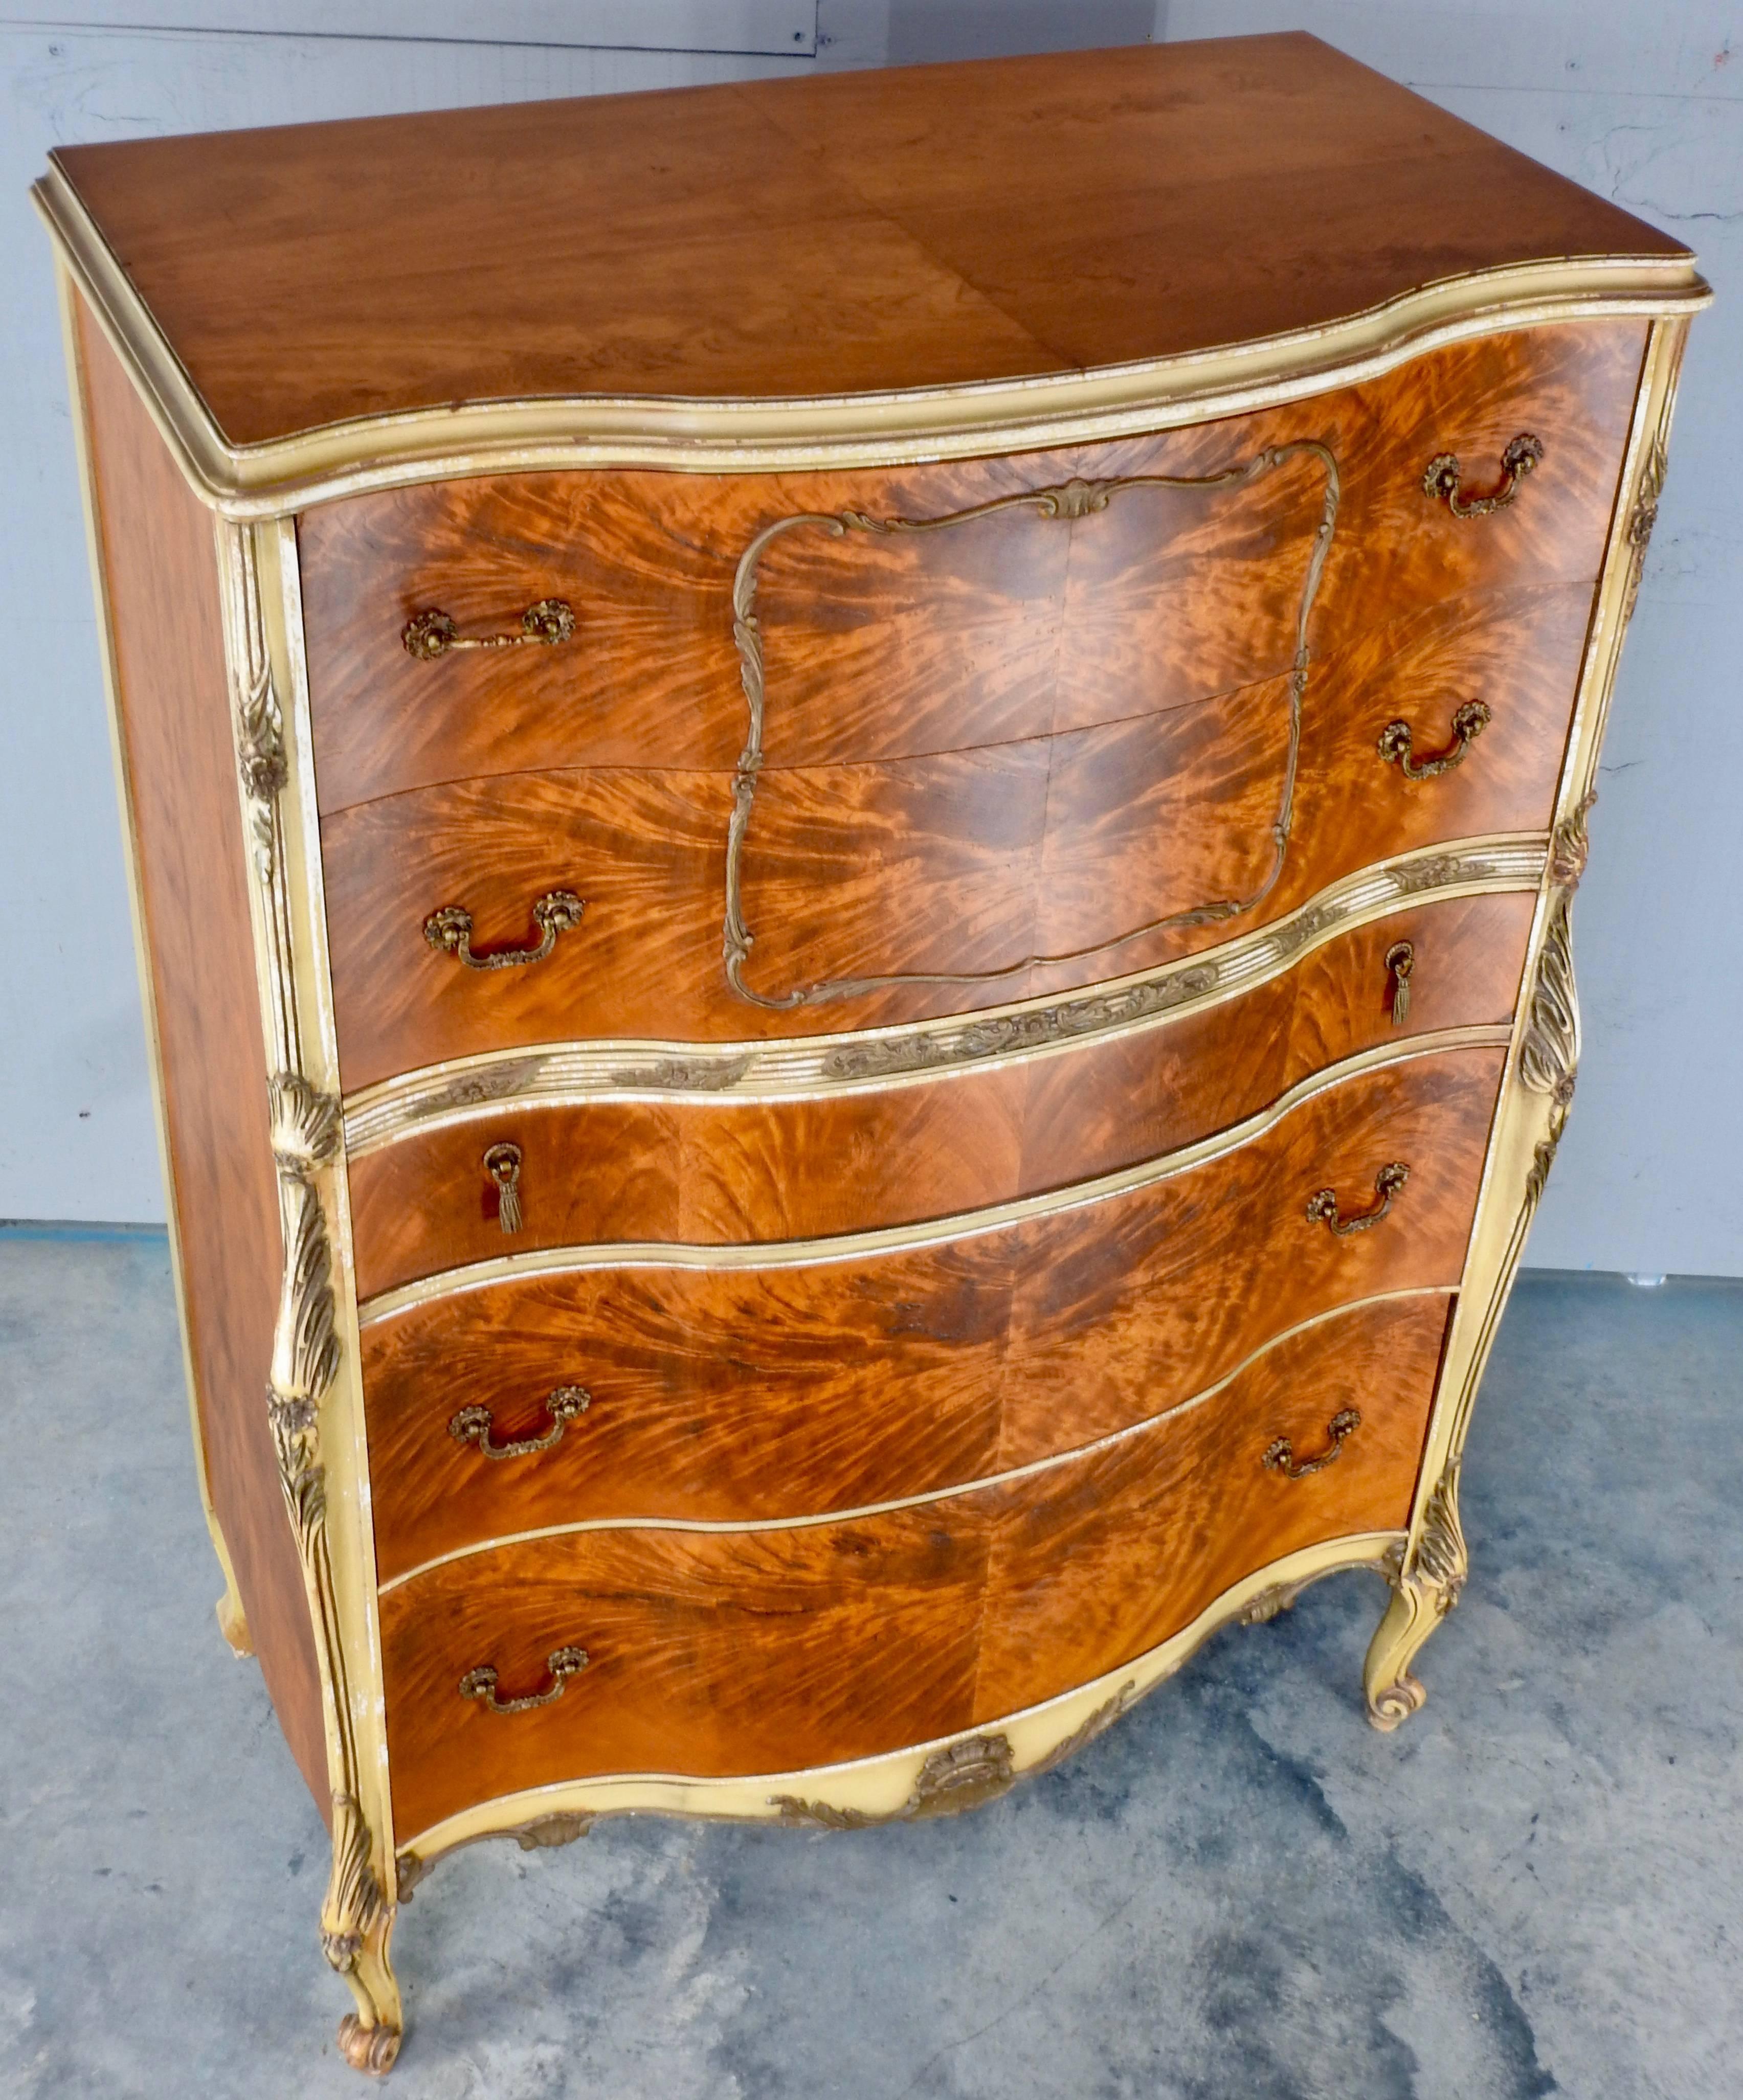 Elegant satinwood makes up this ornate chest on chest from France in the early 20th century. Wood trim painted gold adds to the beauty of this piece. Five drawers give you ample storage. The curved front adds to the grace of this chest. This piece